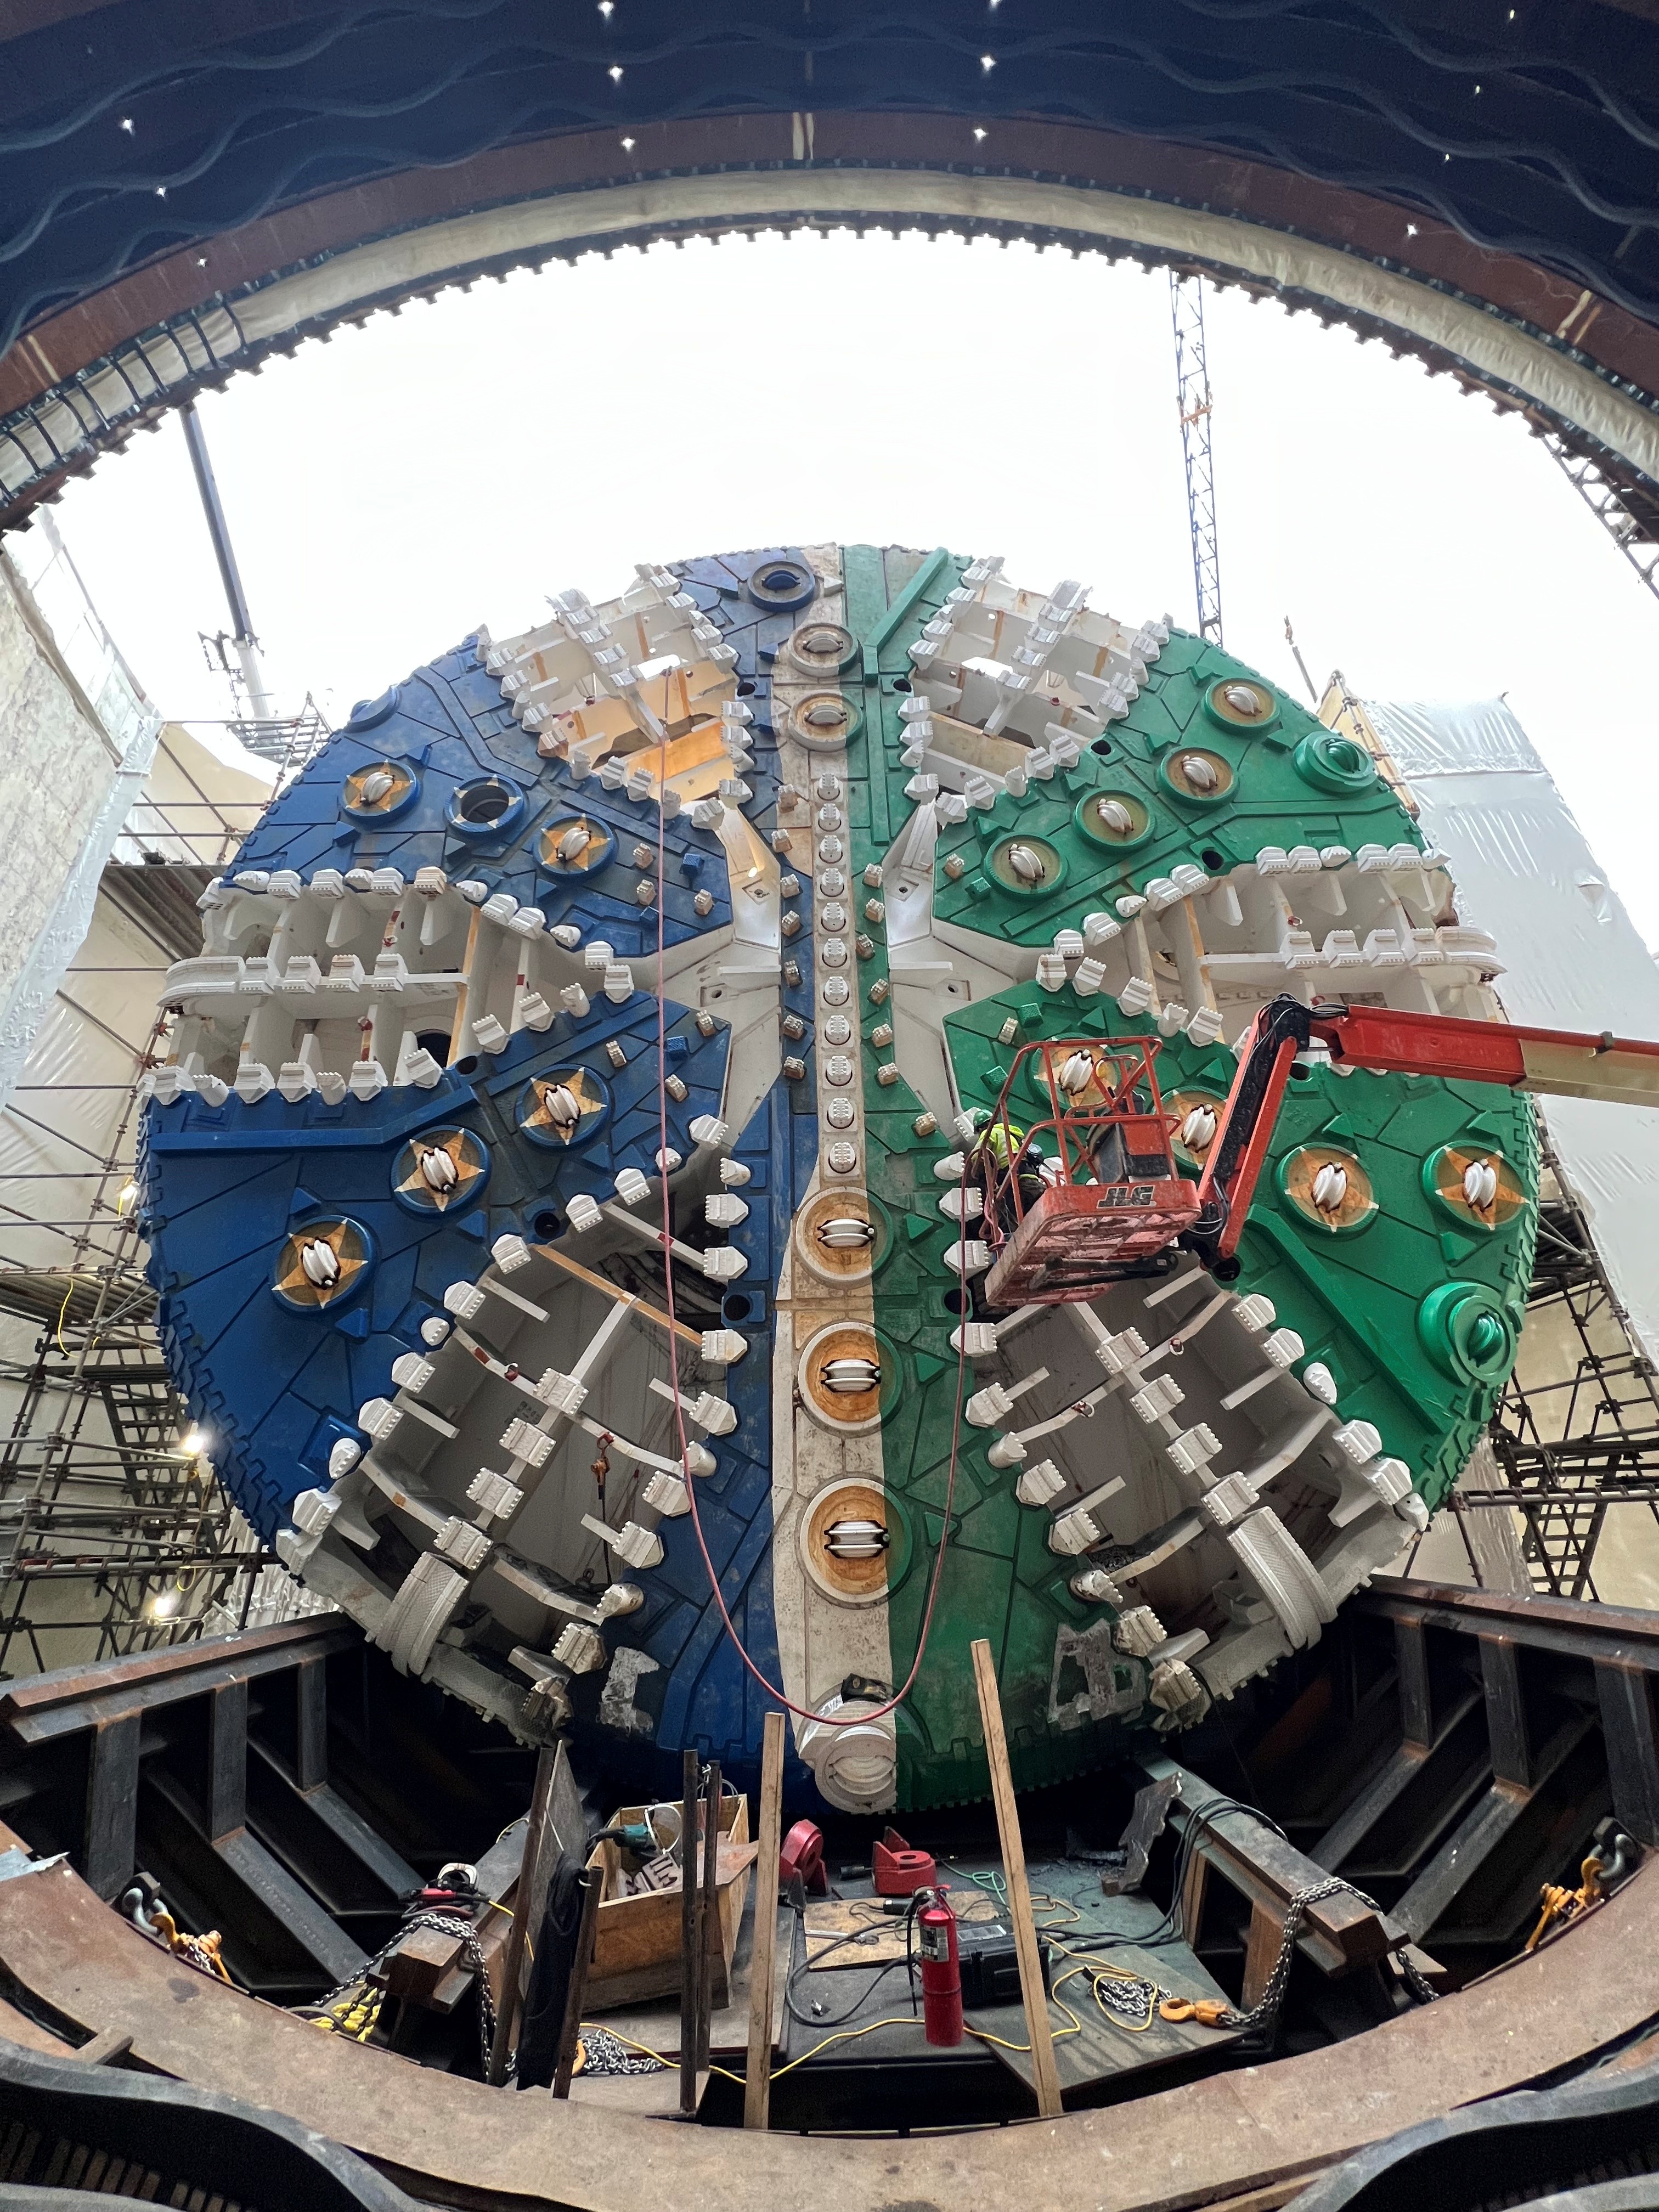 Honorable mention photo by Lion Nitschke : Hampton Roads Bridge Tunnel, Virginia “View of variable TBM "Mary's" cutterhead from the start-up seal.”